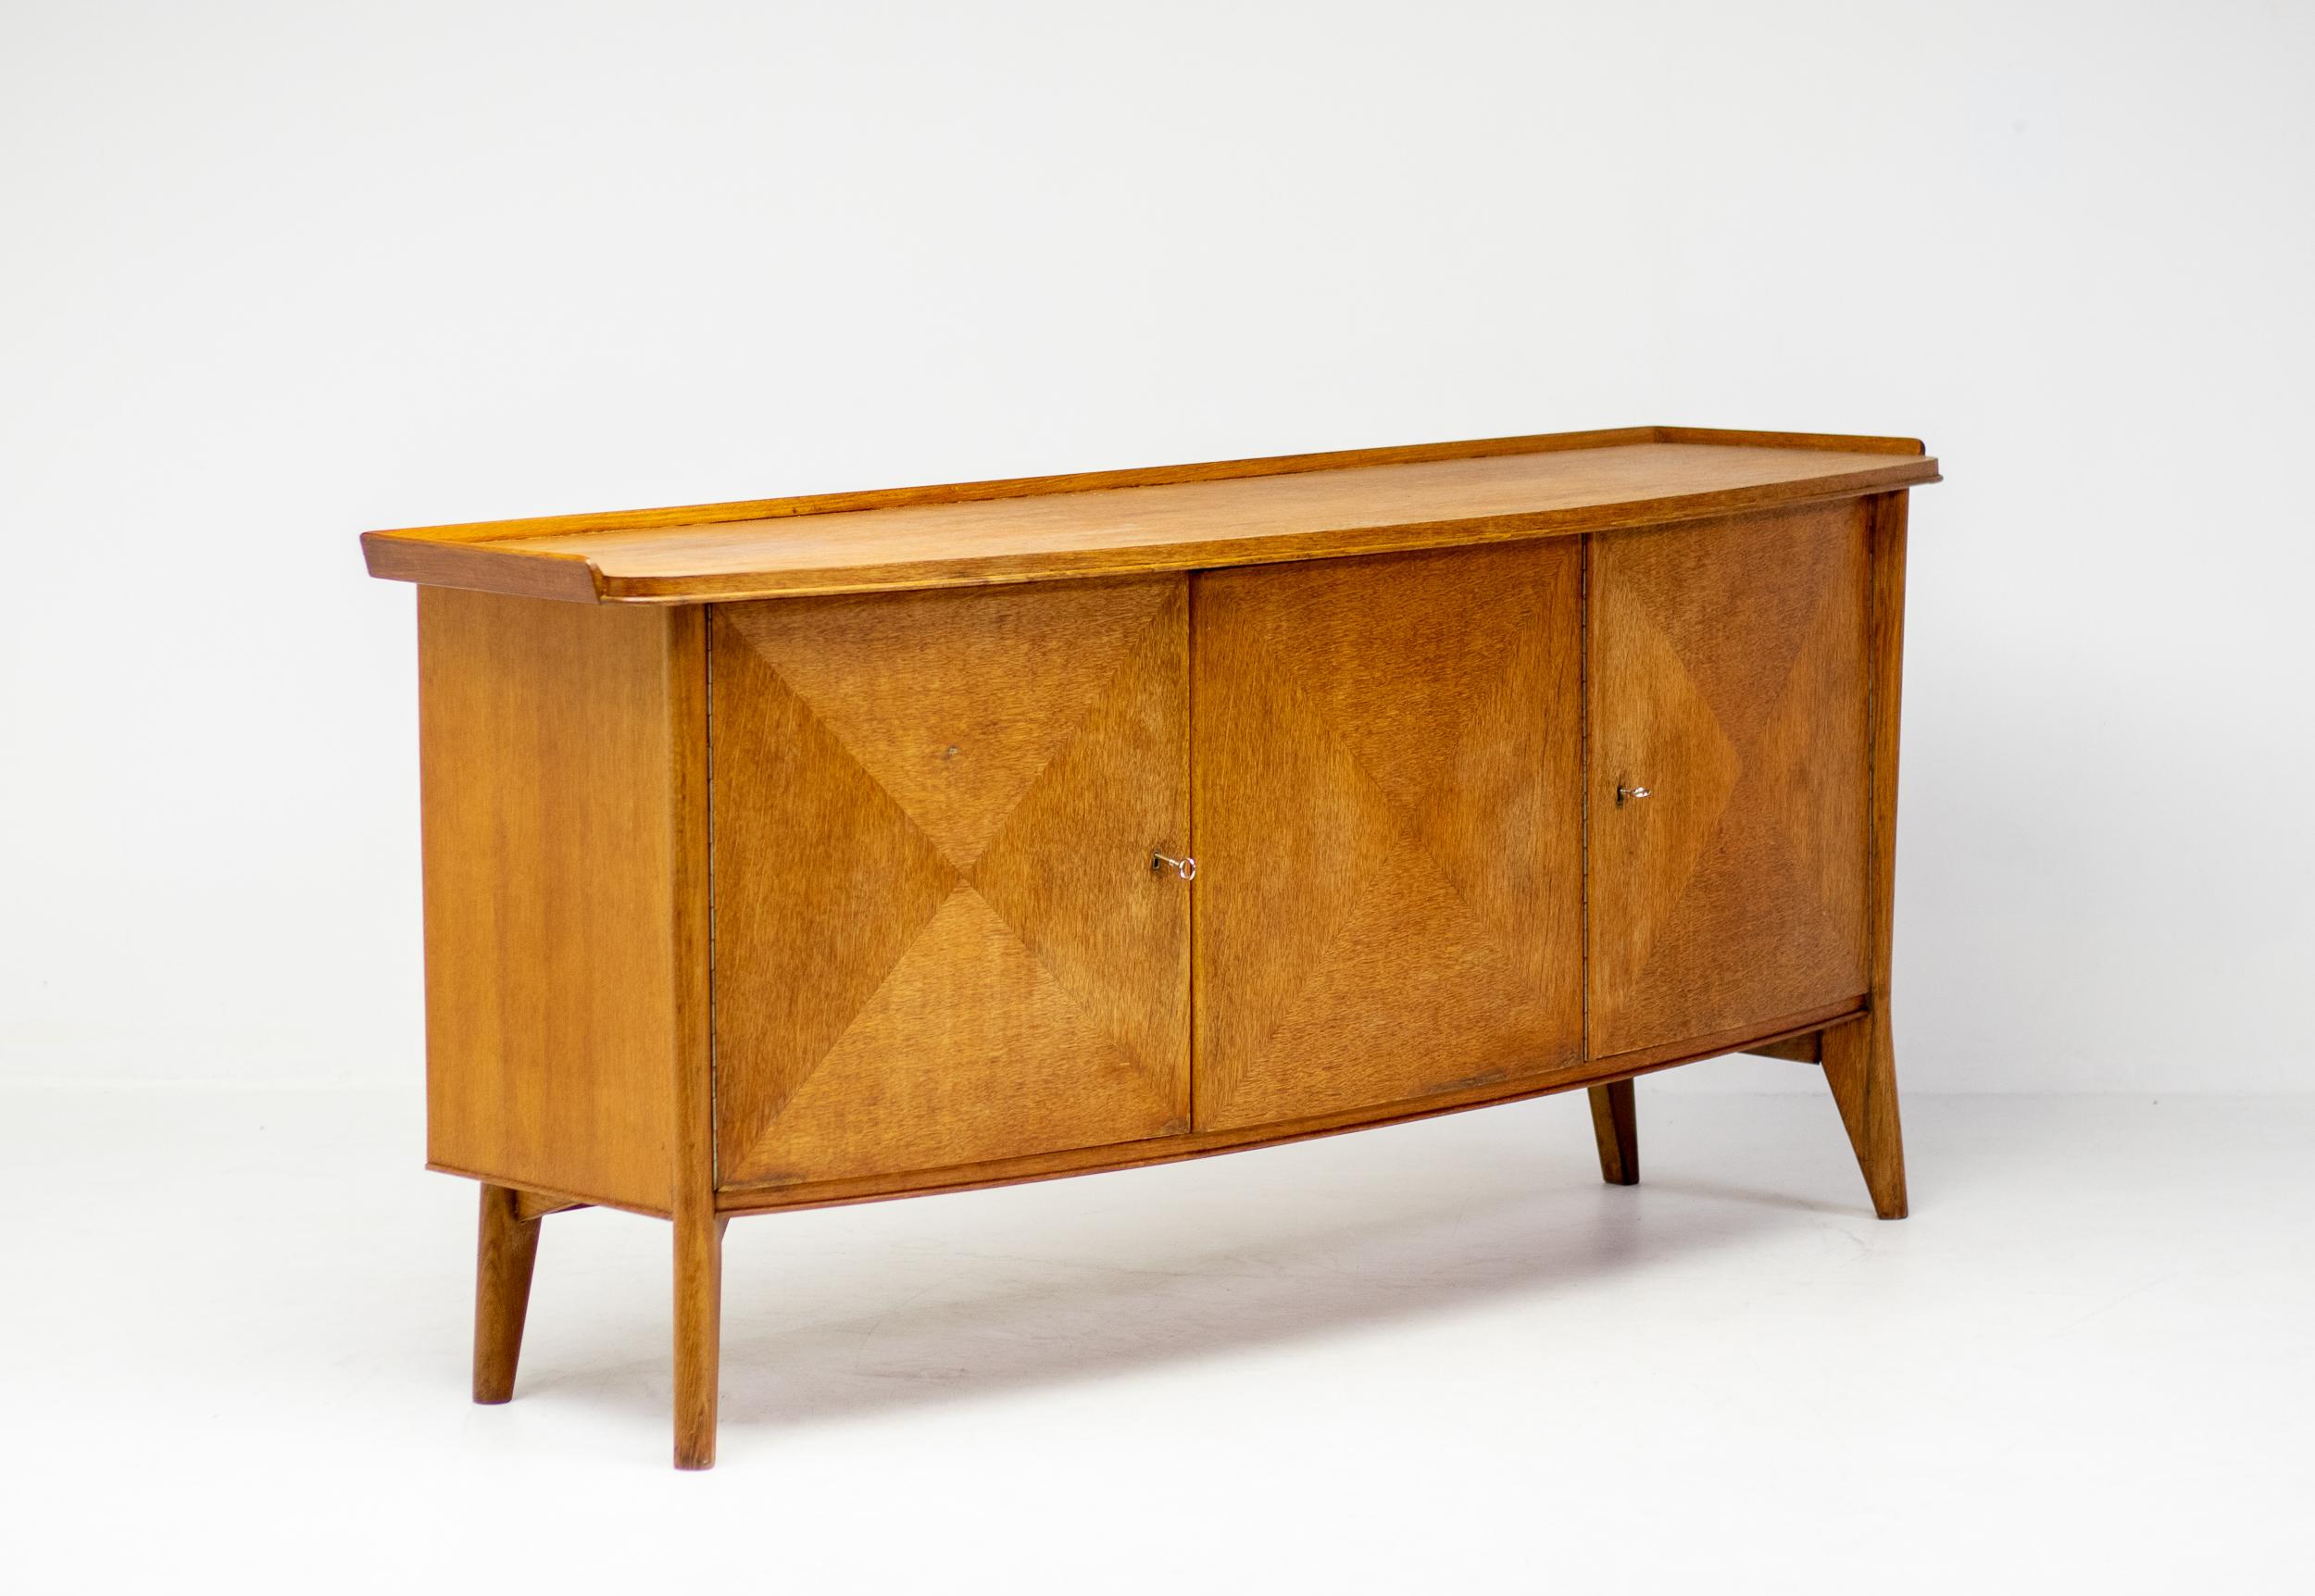 This very rare design by Dutch designer Cees Braakman for Pastoe predates the design of the award-winning design of the “Pointe de Diamant” Sideboard by Antoine Philippon and Jacqueline le Coq by over 10 years. 
One can clearly see where this